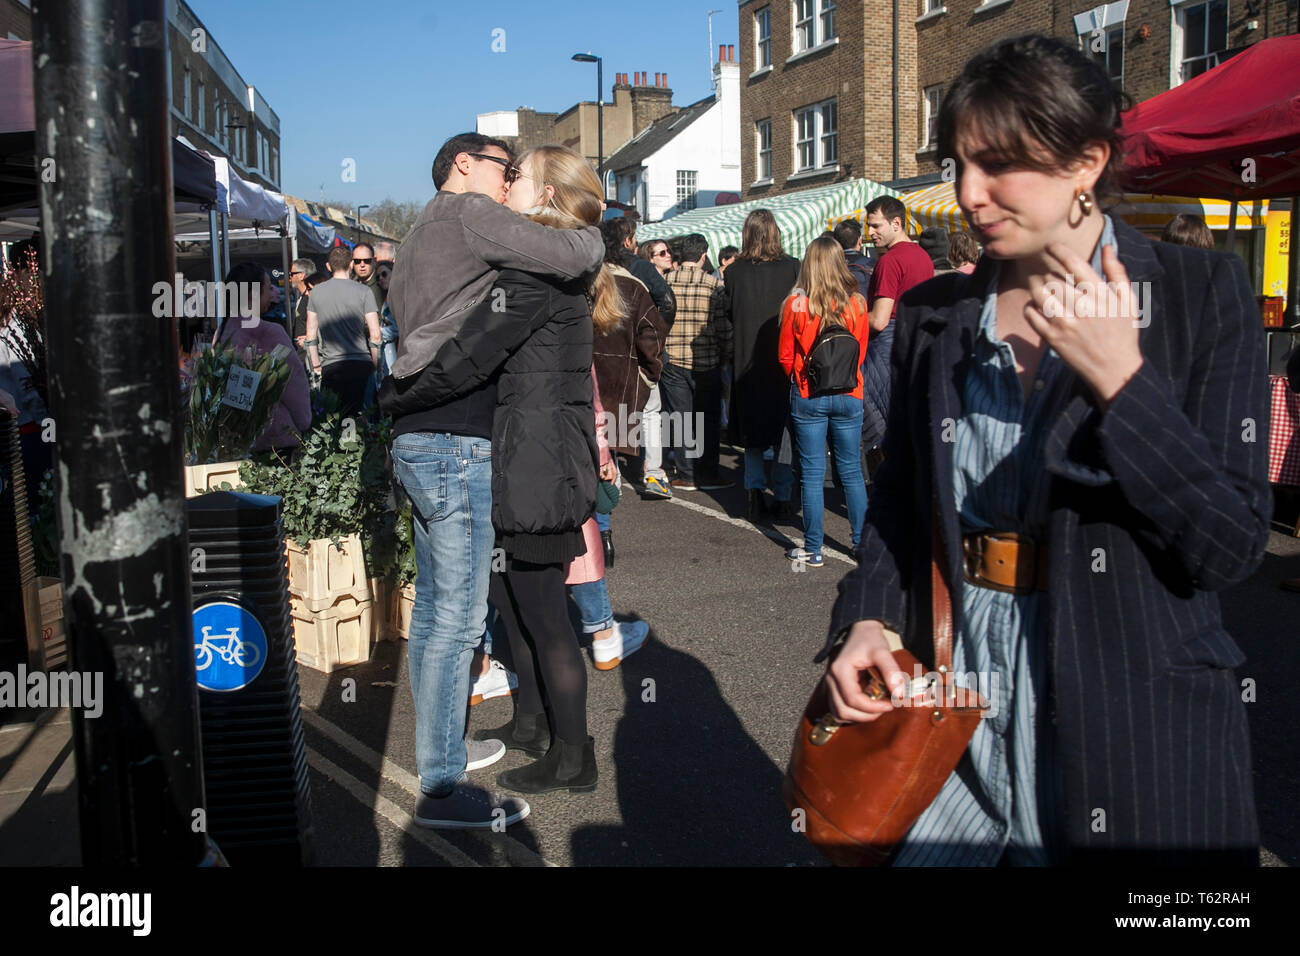 LONDON, UK - APRIL 17, 2019 People at the East London. Happy couple kisses on broadway market Stock Photo